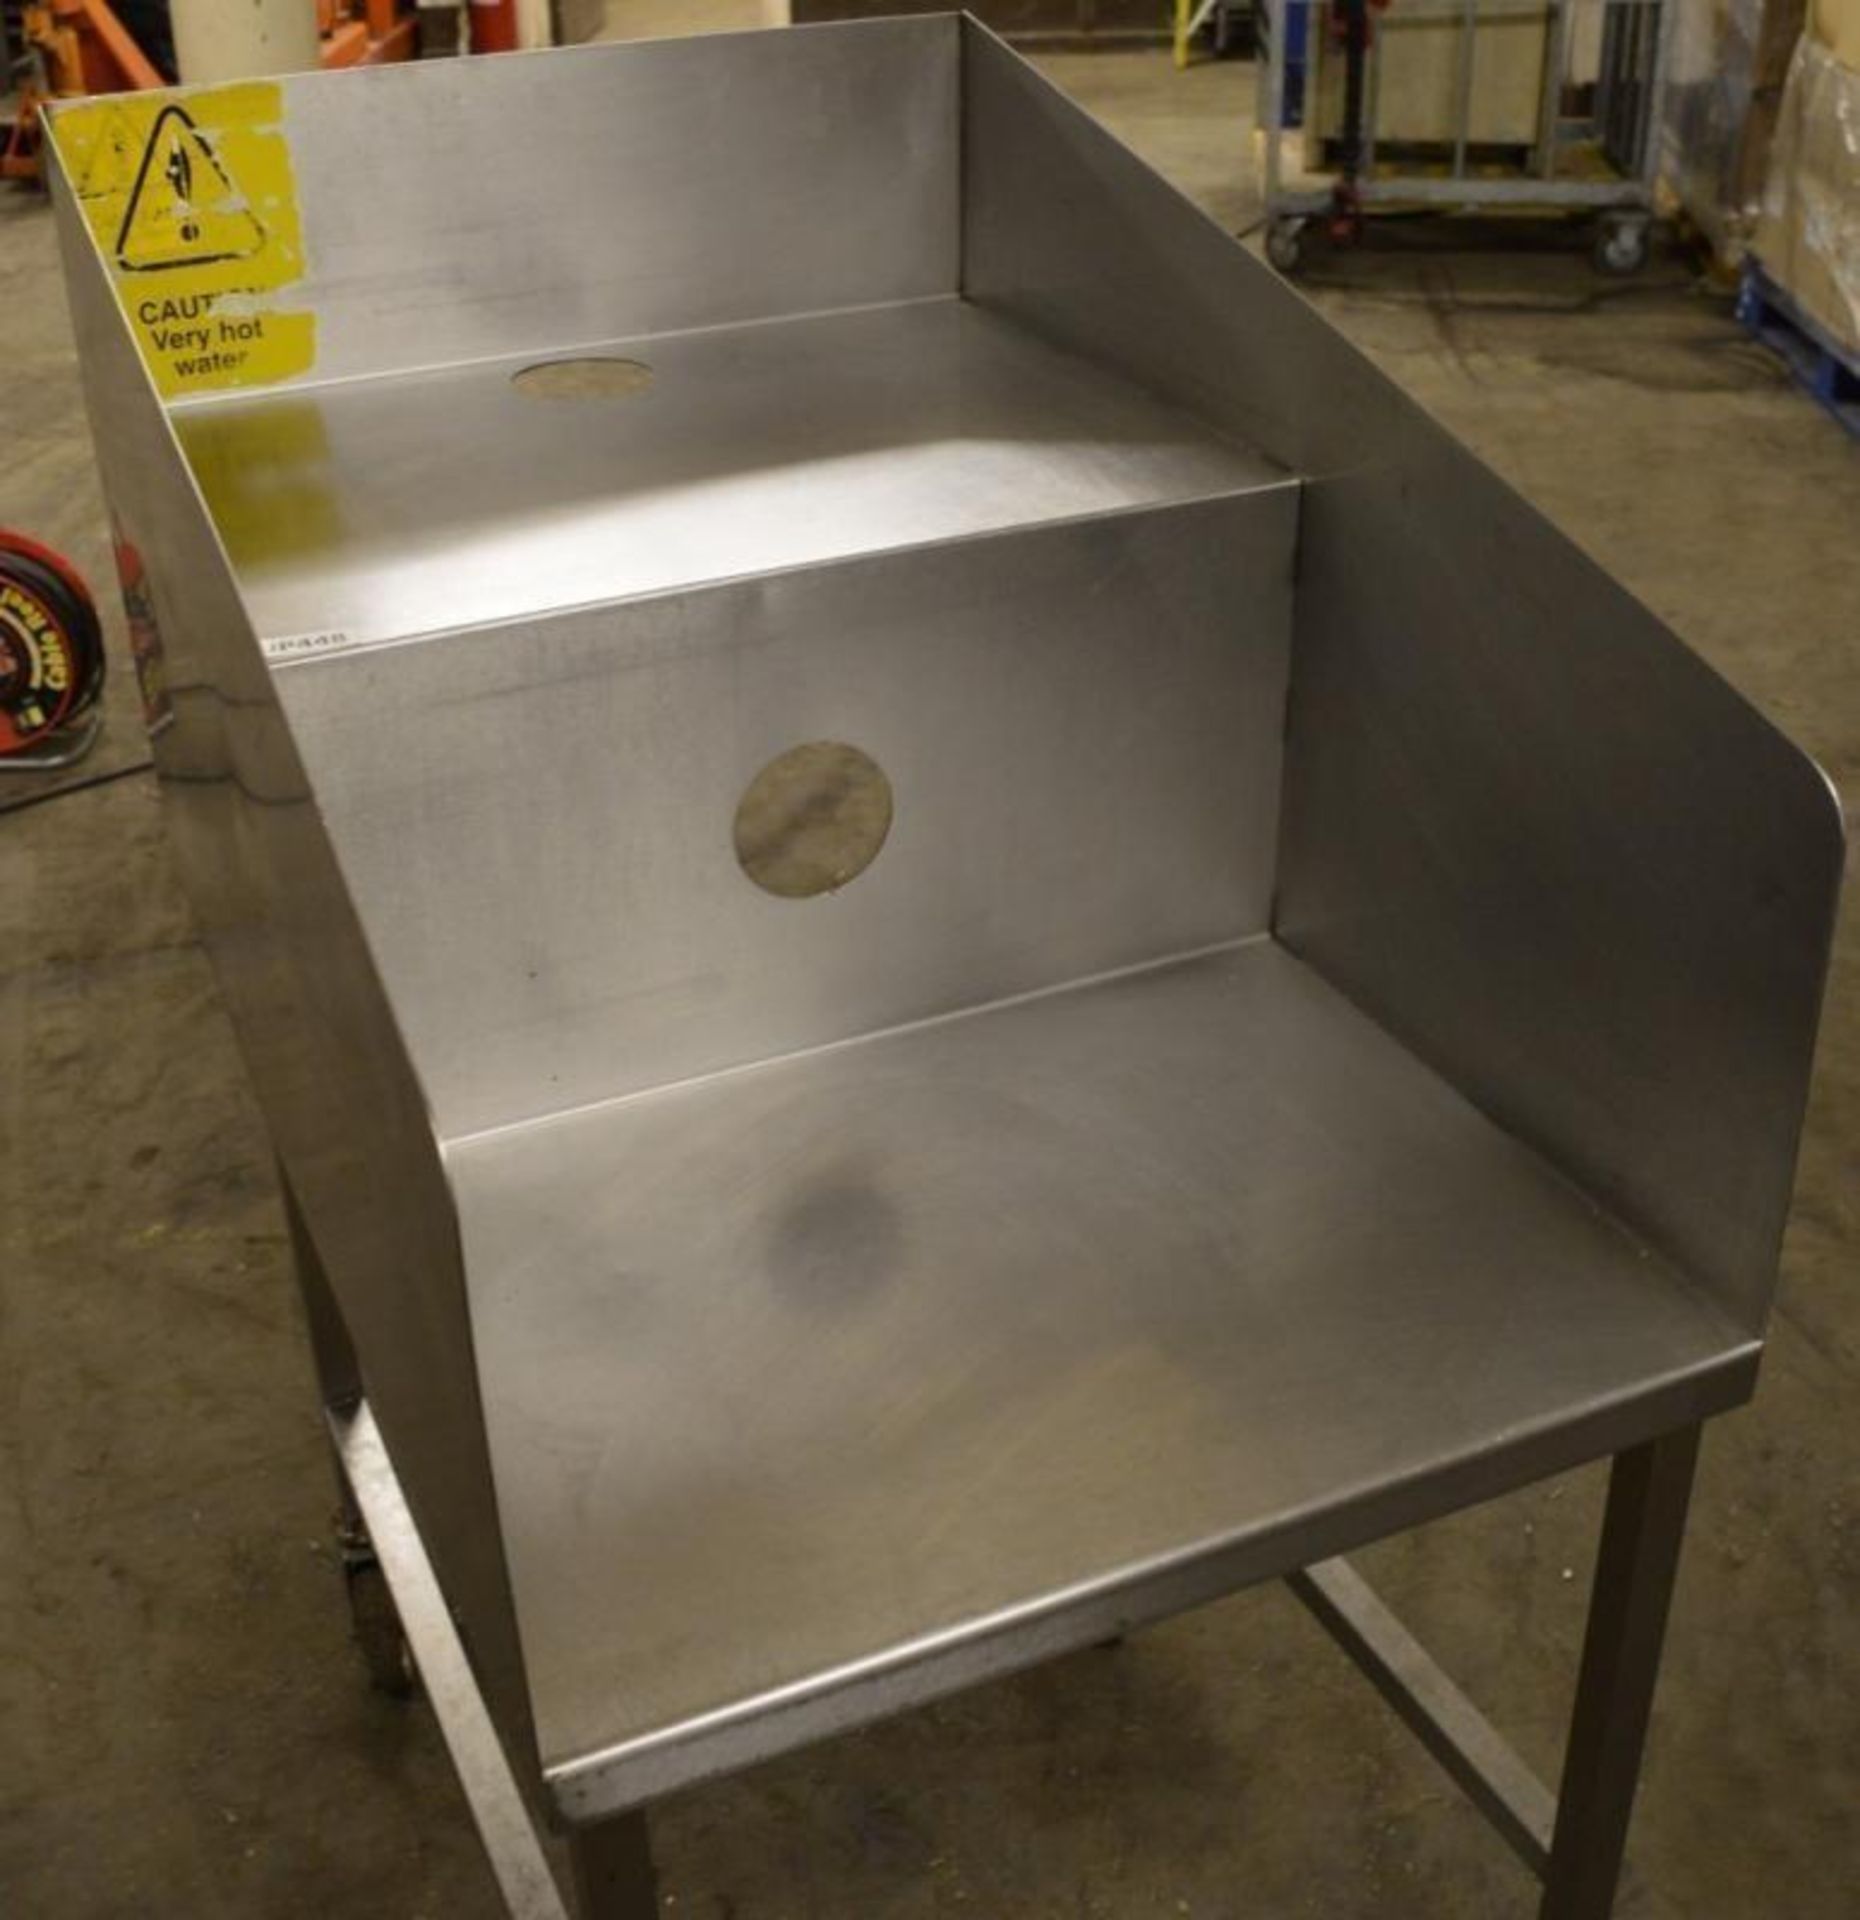 1 x Stainless Steel Commercial Waste Bench - Two Tier Waste Chute on Castors - H114 x W62.5 x D90 cm - Image 3 of 5